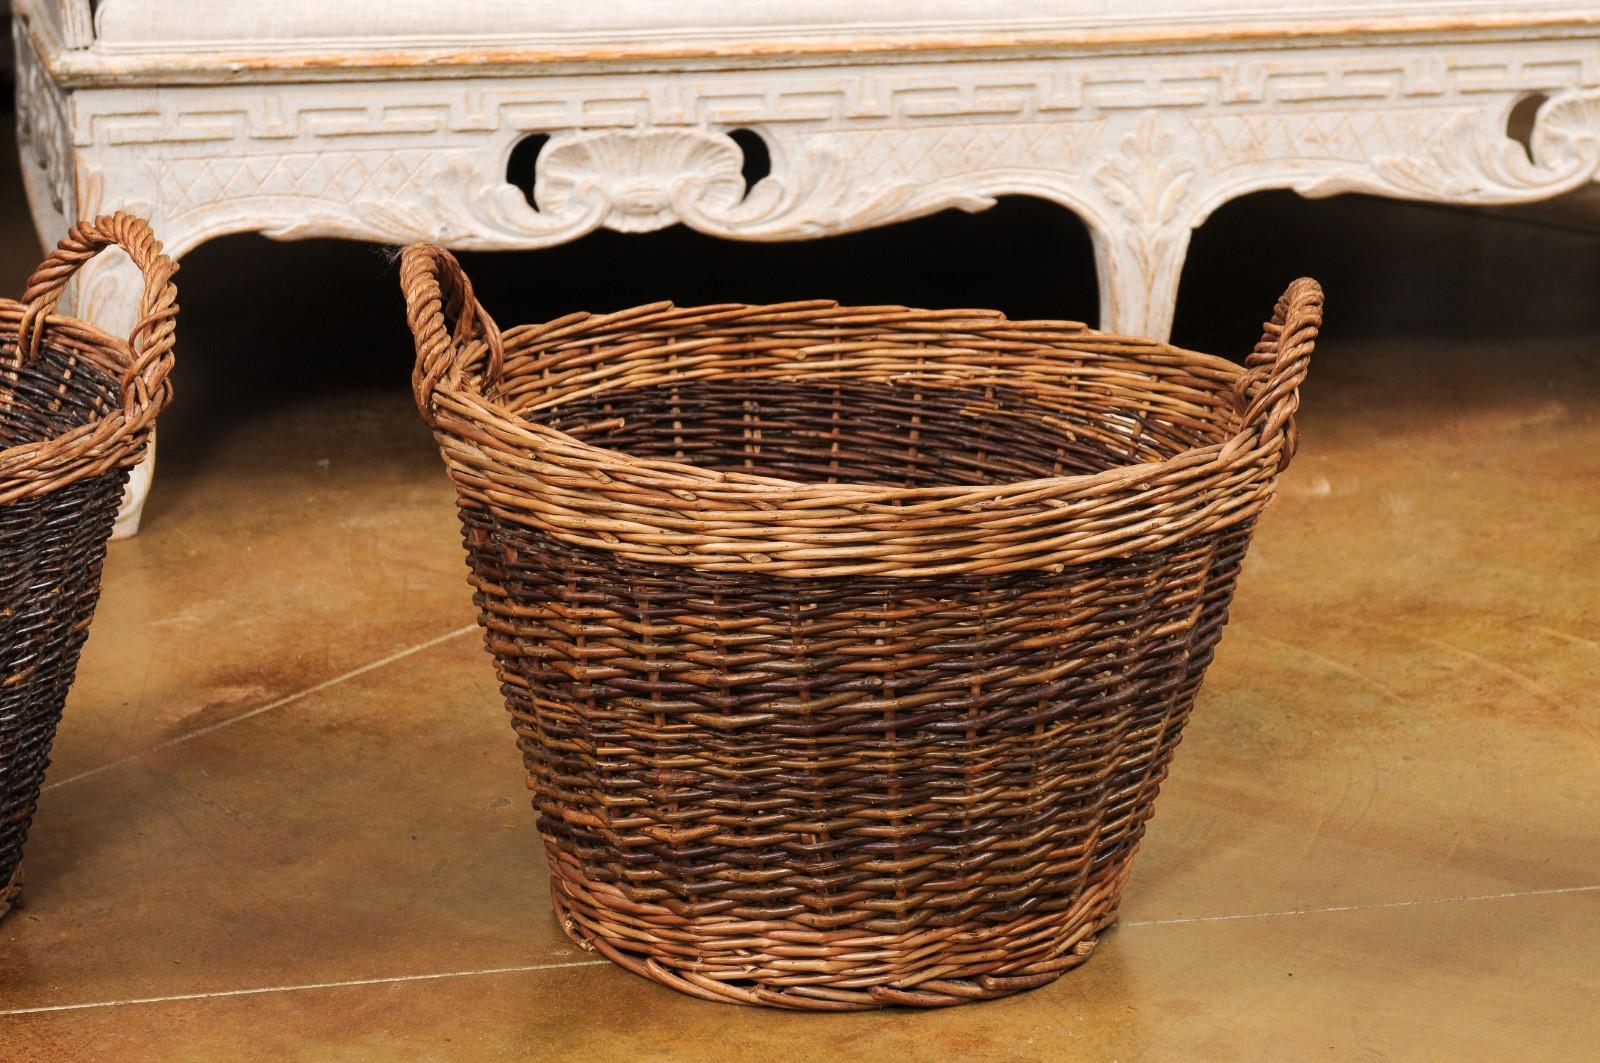 Rustic Handmade English Two Toned Wicker Baskets from Devon with Double Handles, Each